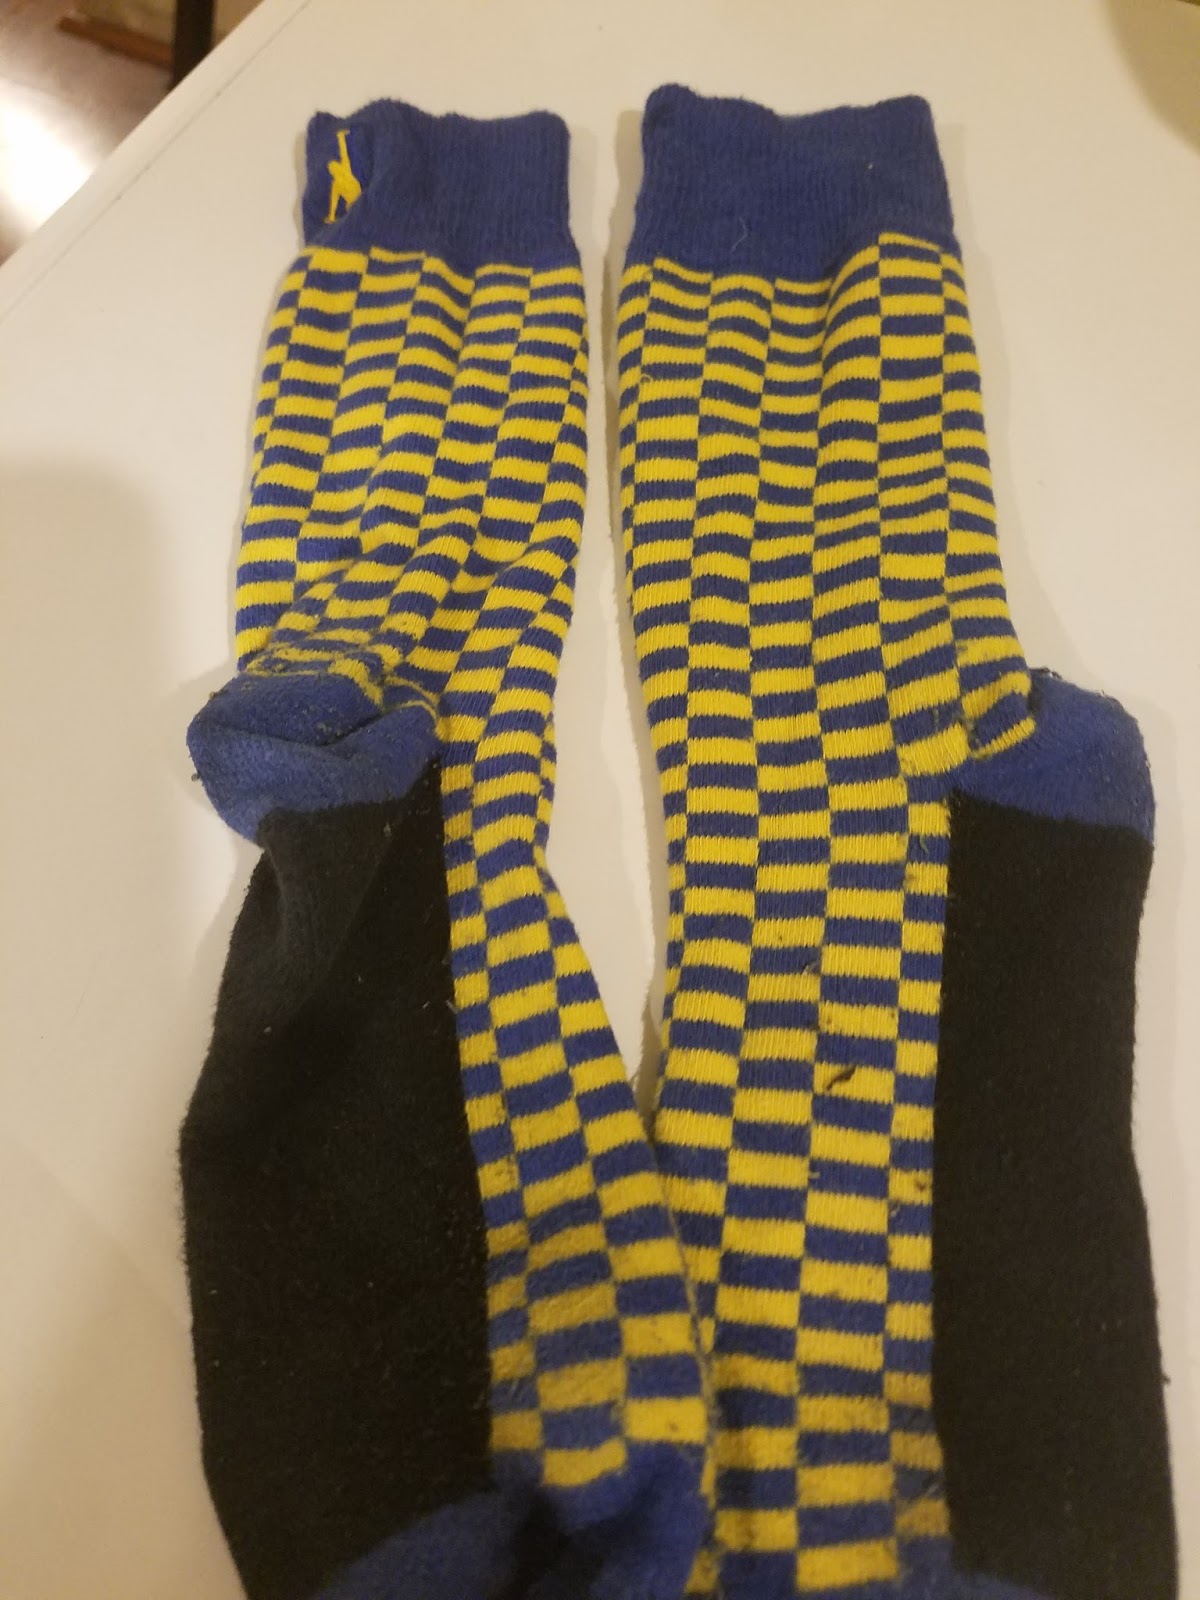 Adventures in Weseland: One More Year and Upping the Sock Game